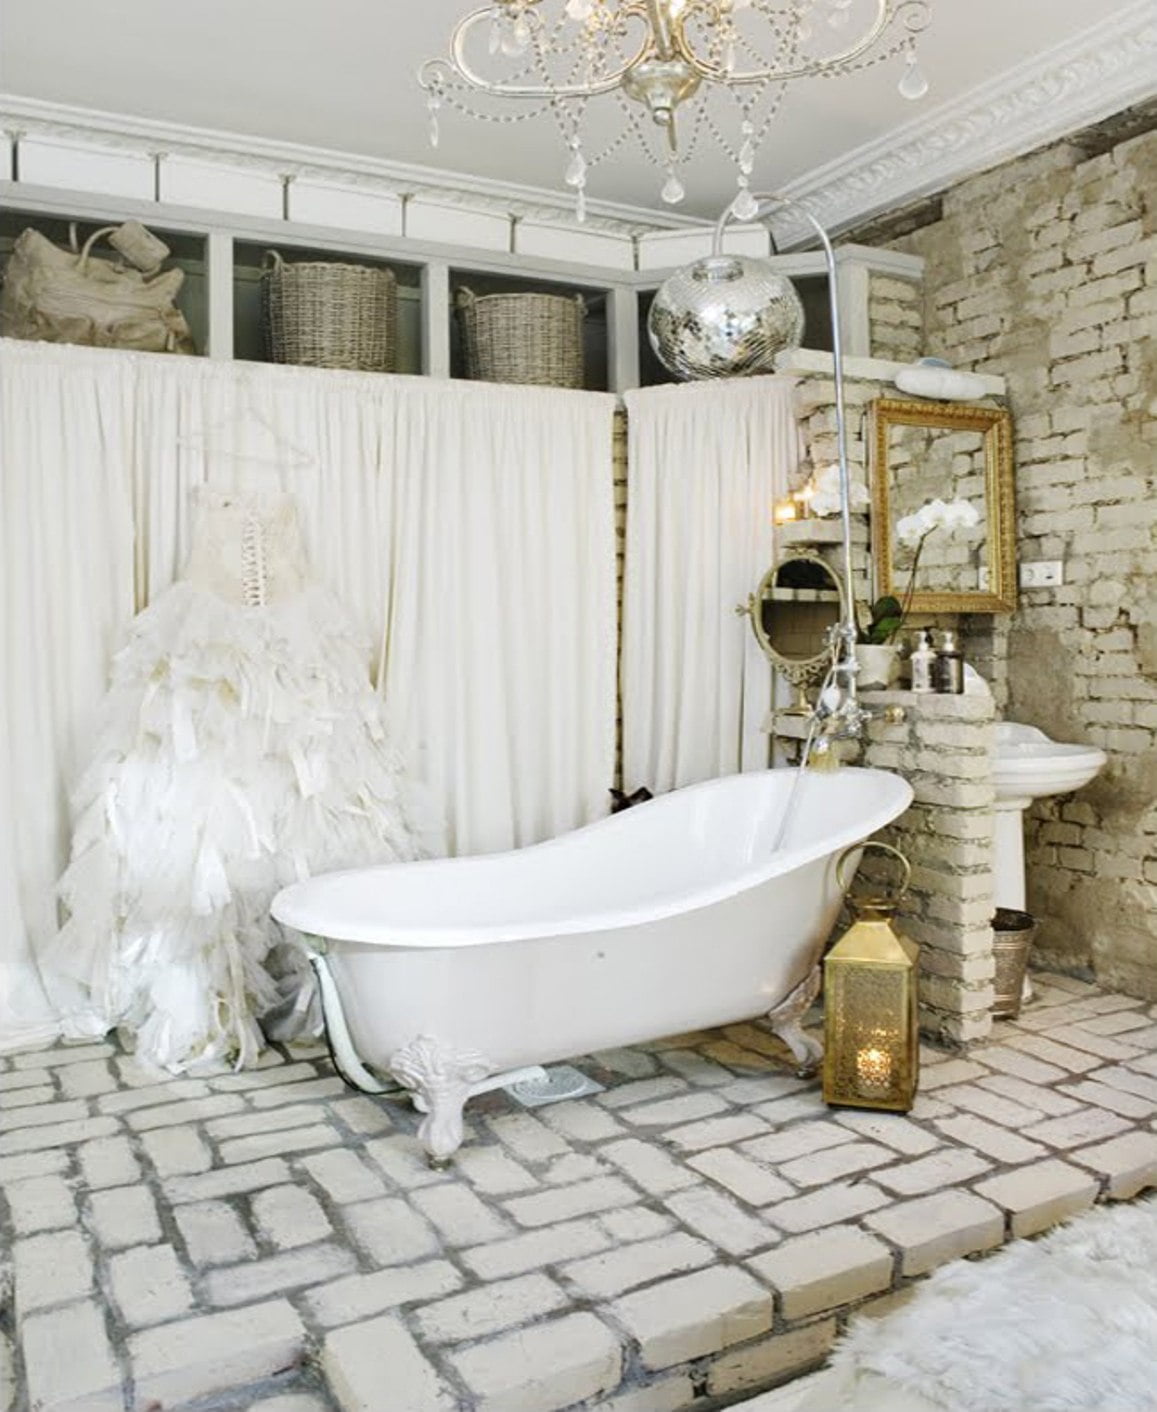 vintage-bathroom-theme-idea-with-brick-wall-and-floor-and-clawfoot-tub-and-crystal-chandelier-and-white-curtains-and-baskets